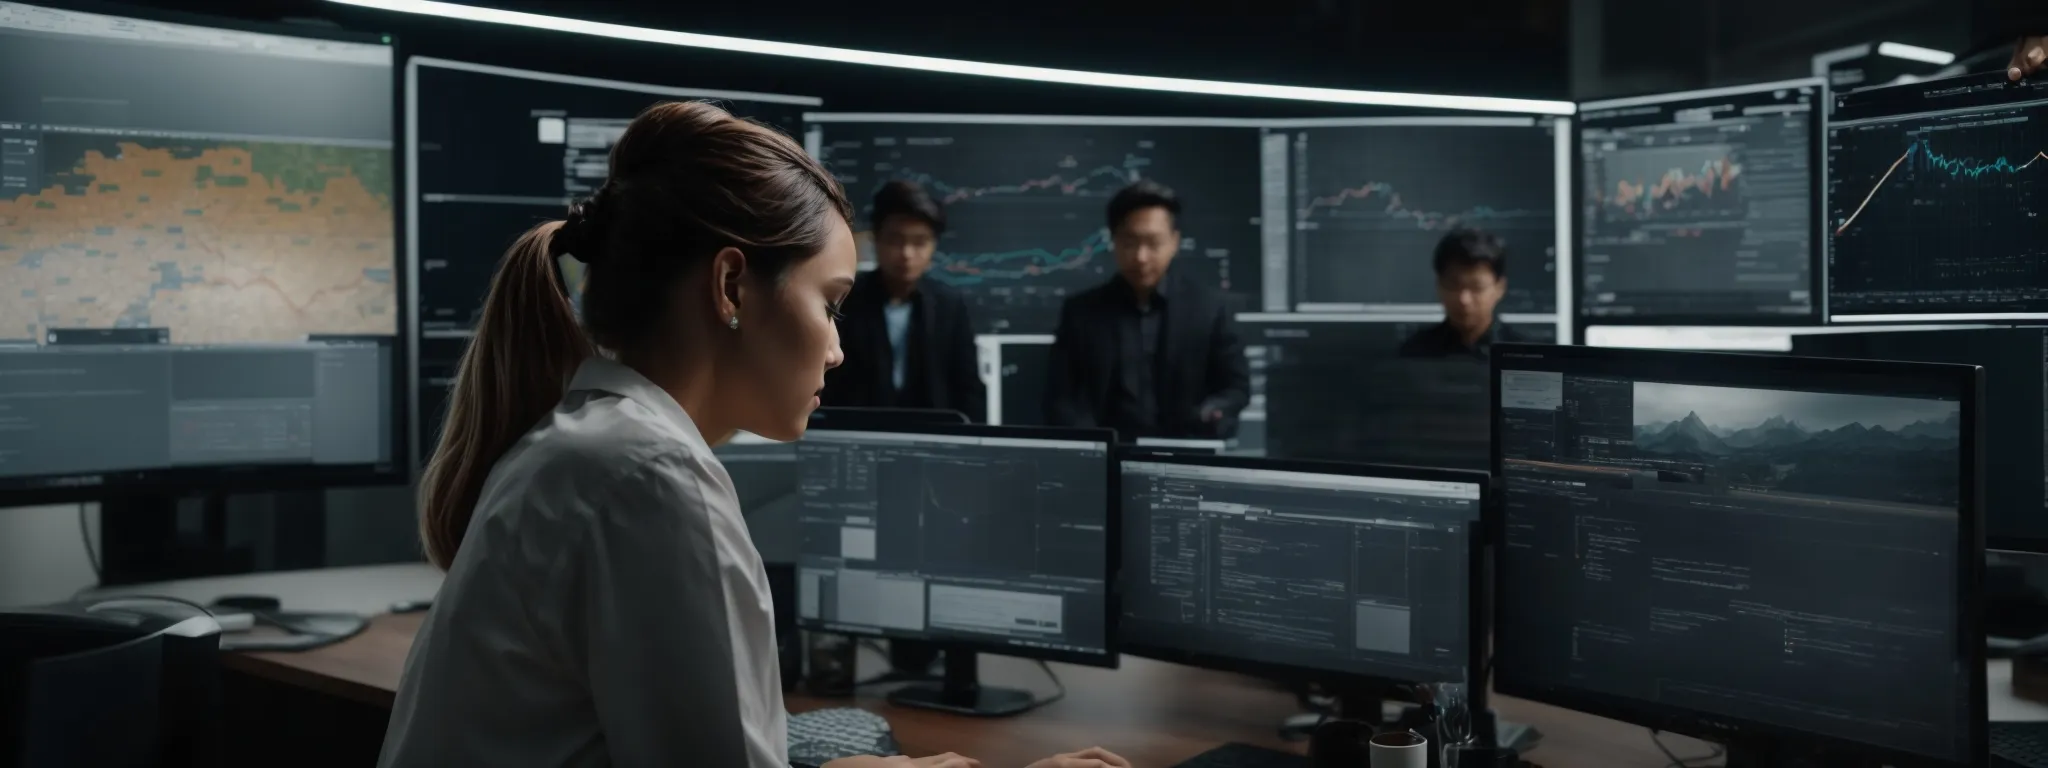 a digital marketing team observes on-screen visual analytics while ai software adjusts a website's user interface in the background.